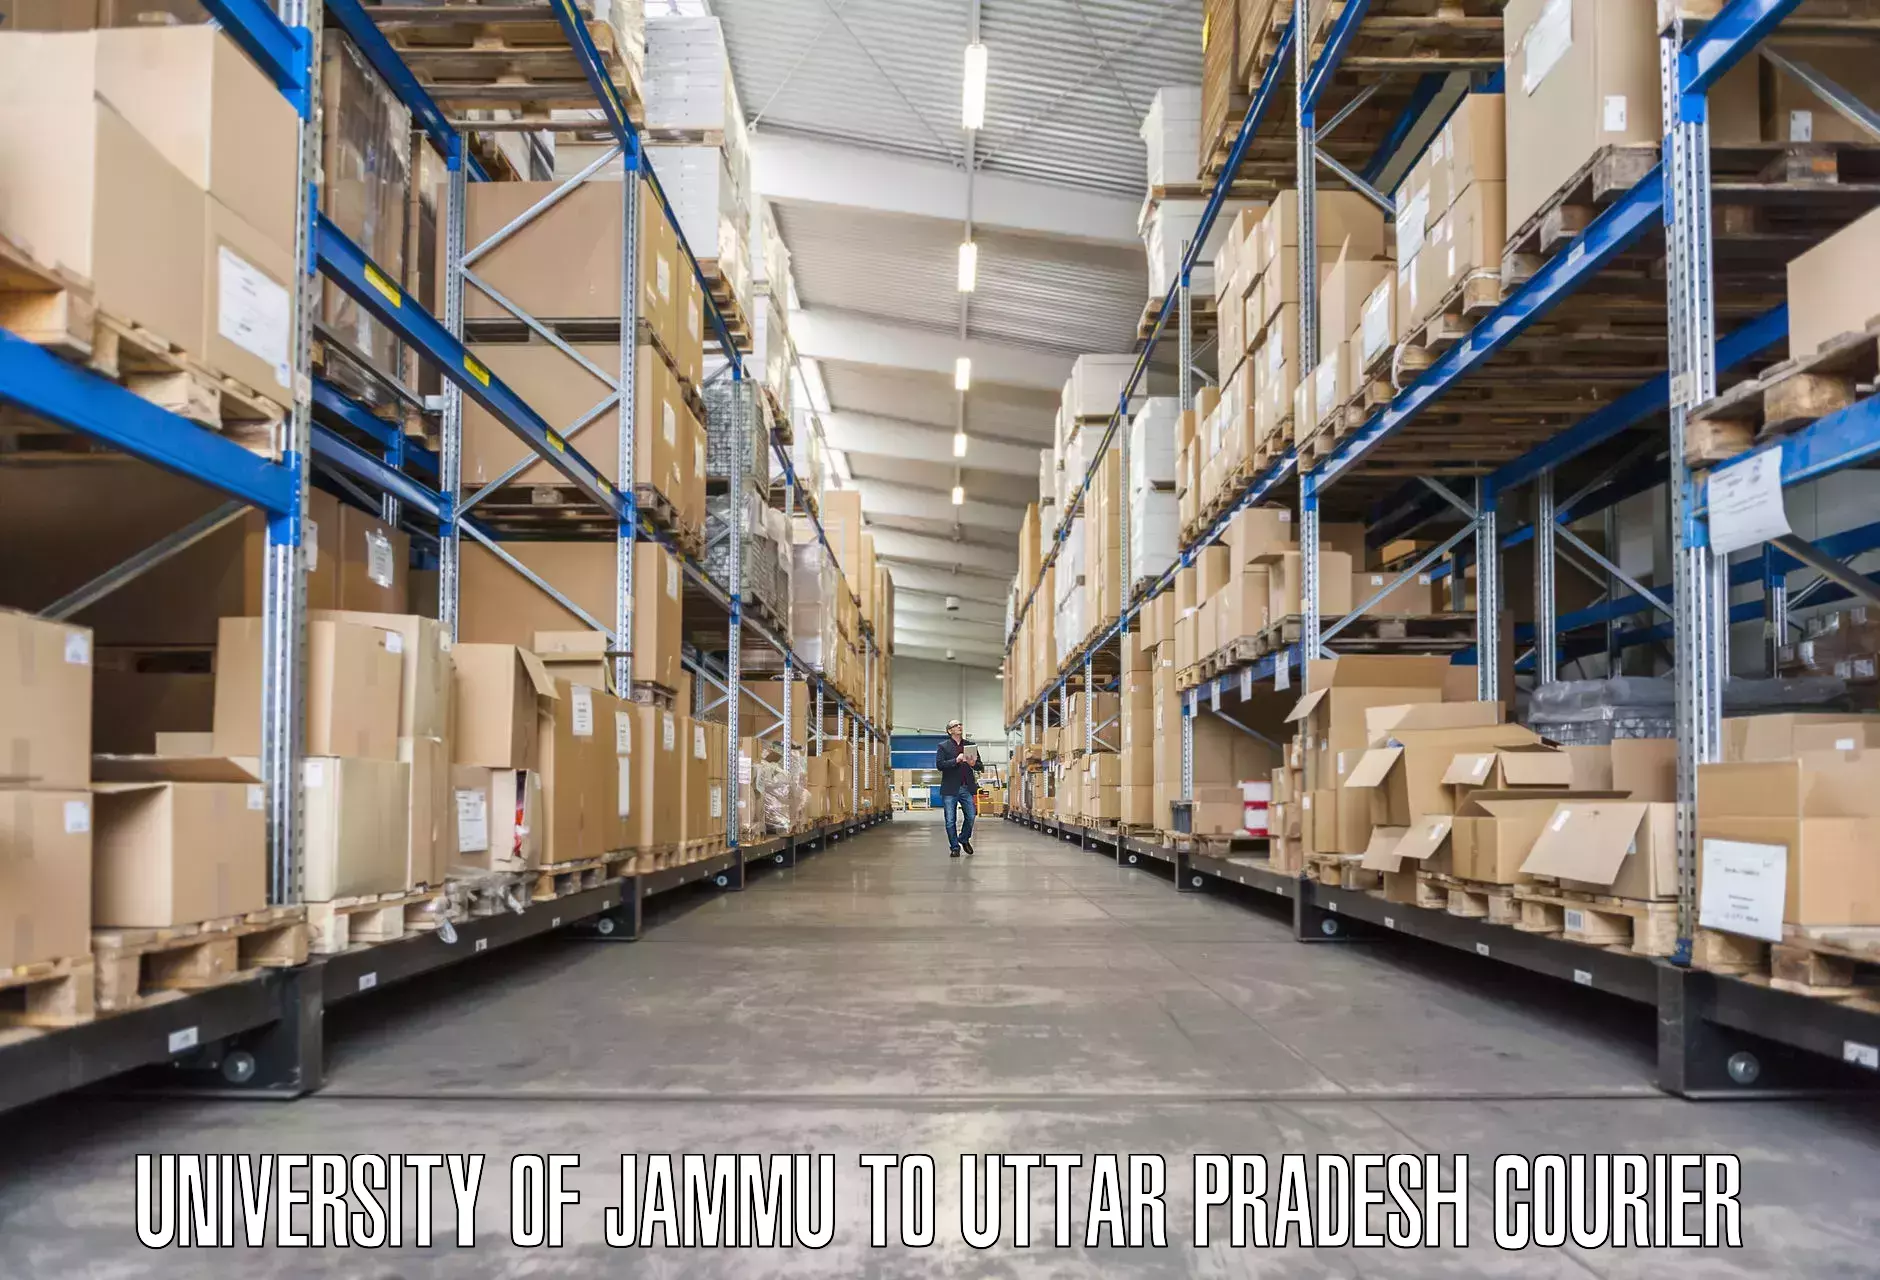 High-quality moving services in University of Jammu to Agra